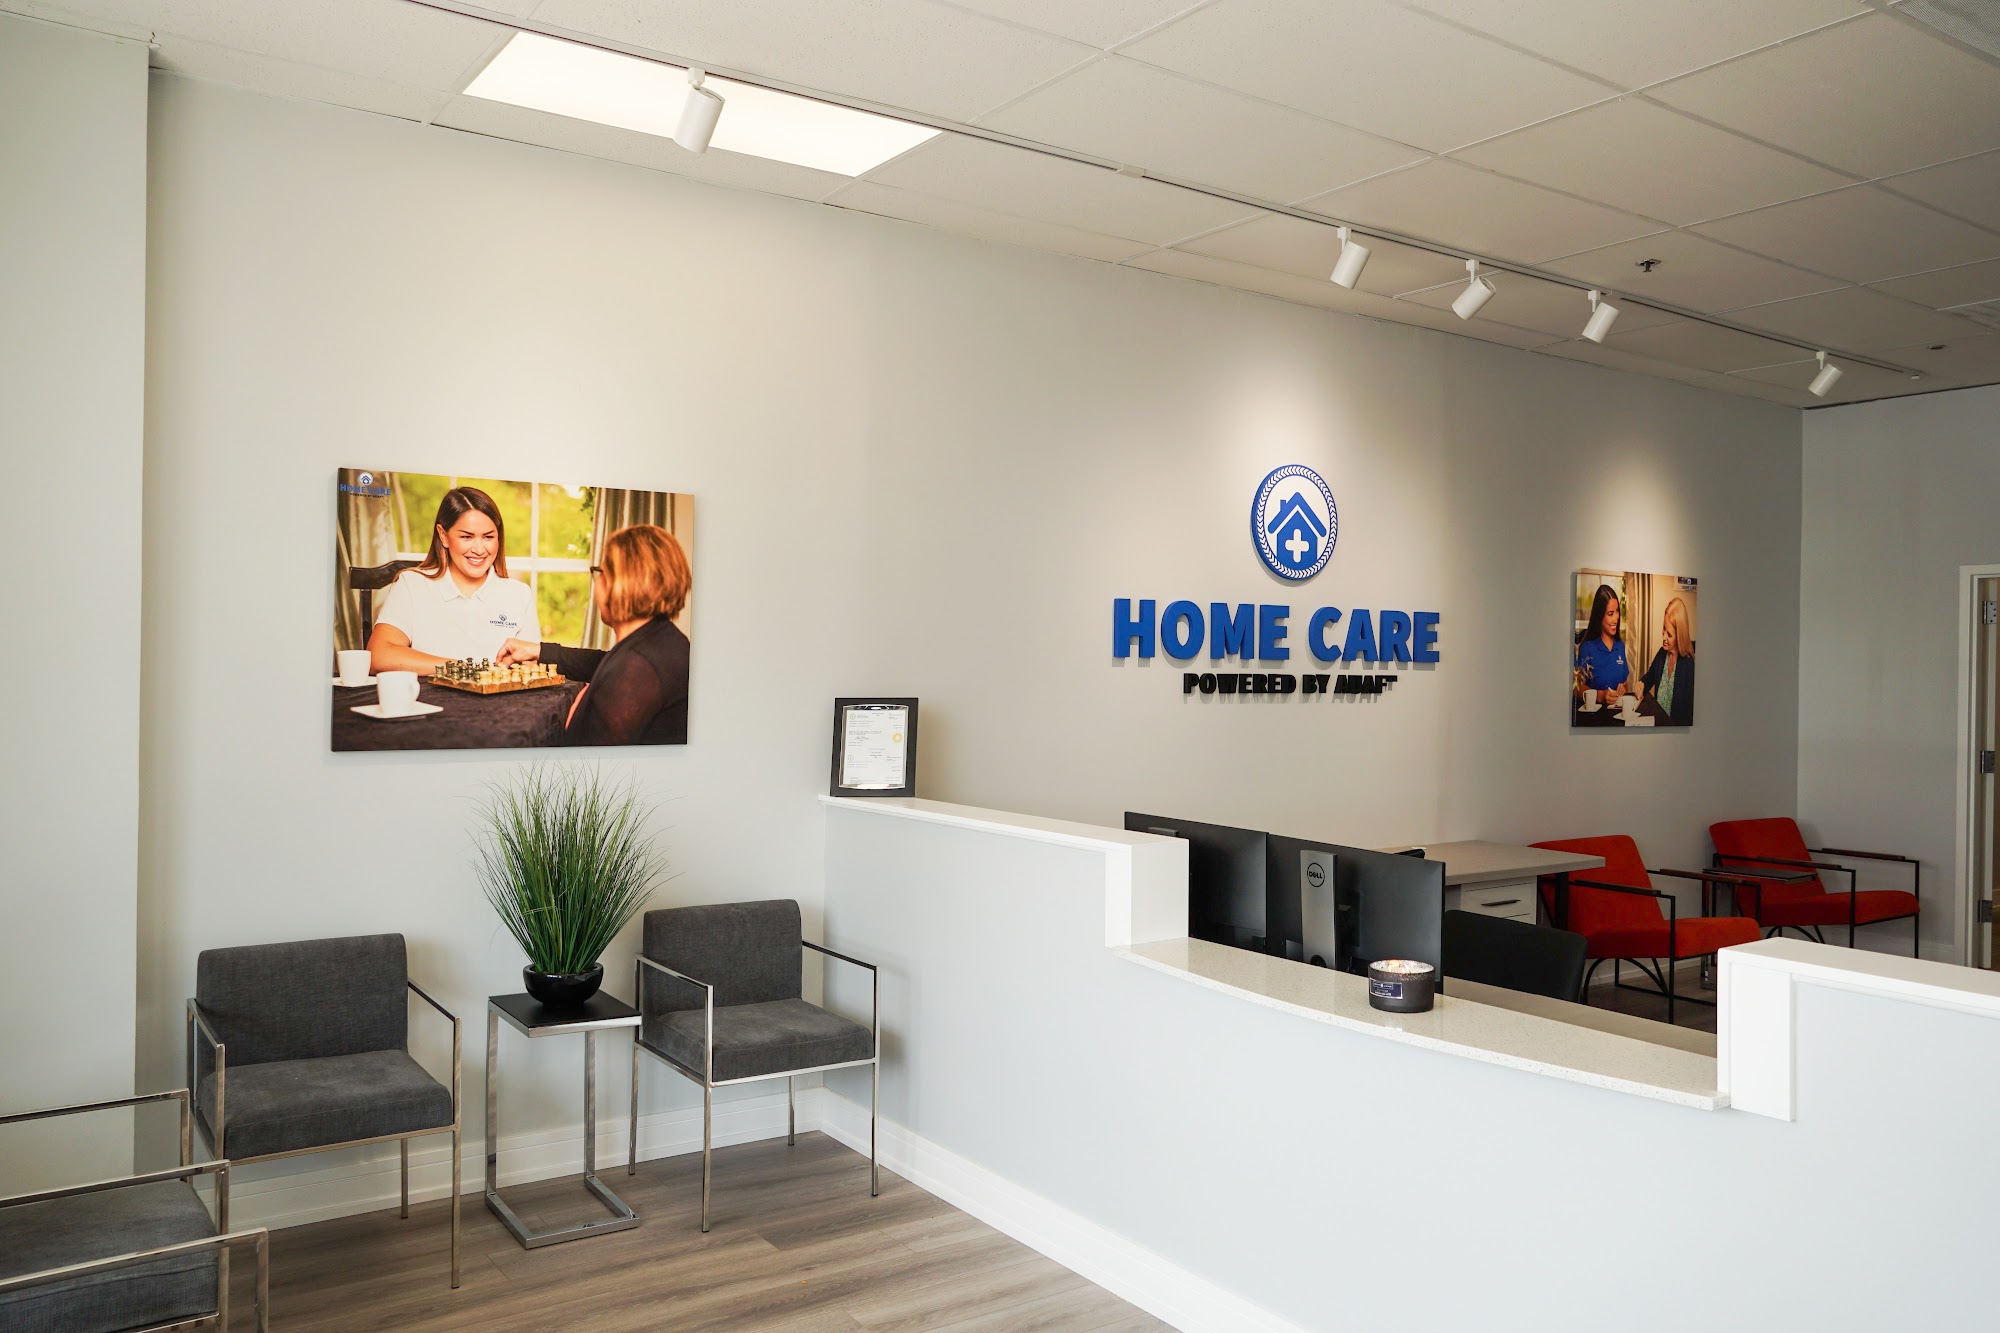 Home Care Powered by AUAF - Chicago IL & Surrounding Area 4343 W Touhy Ave, Lincolnwood Illinois 60712